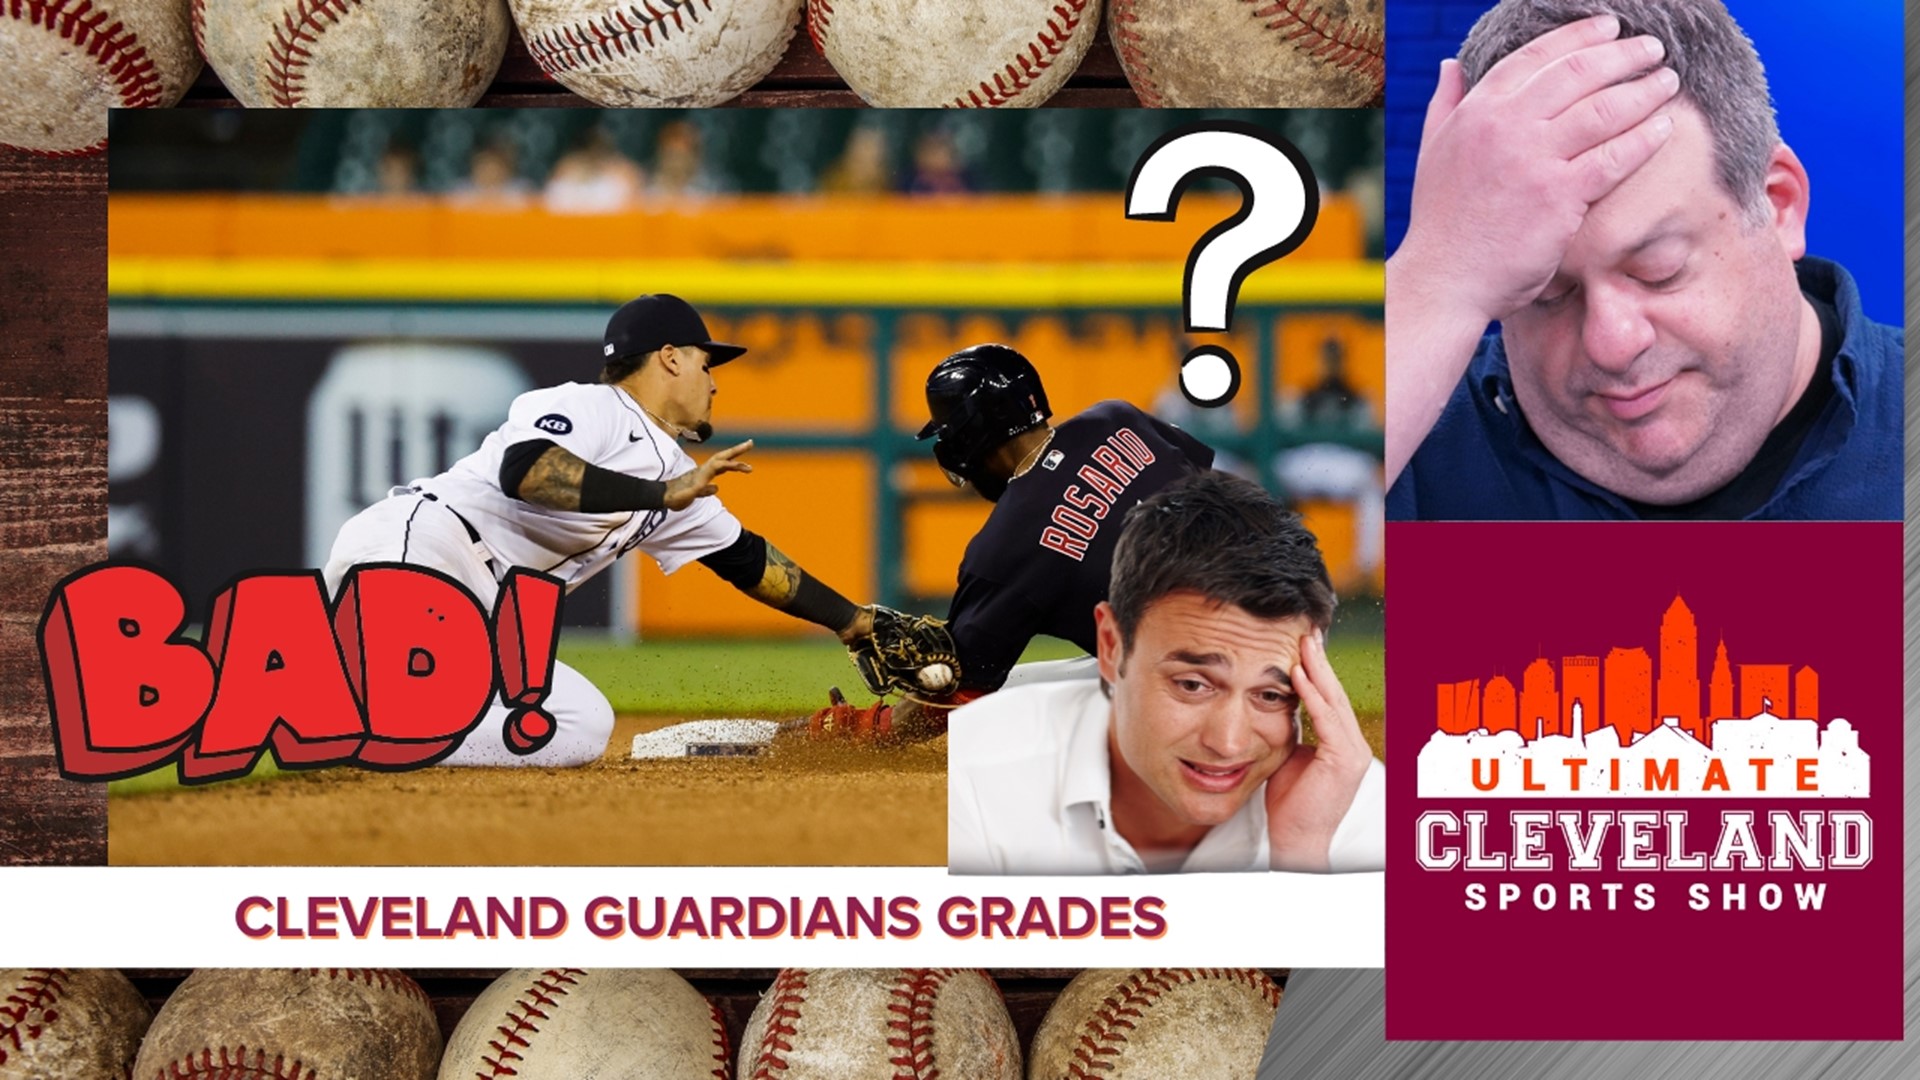 The UCSS crew discusses the Cleveland Guardians' season so far, their current record, and their grades overall. Jay says their season is slipping away.